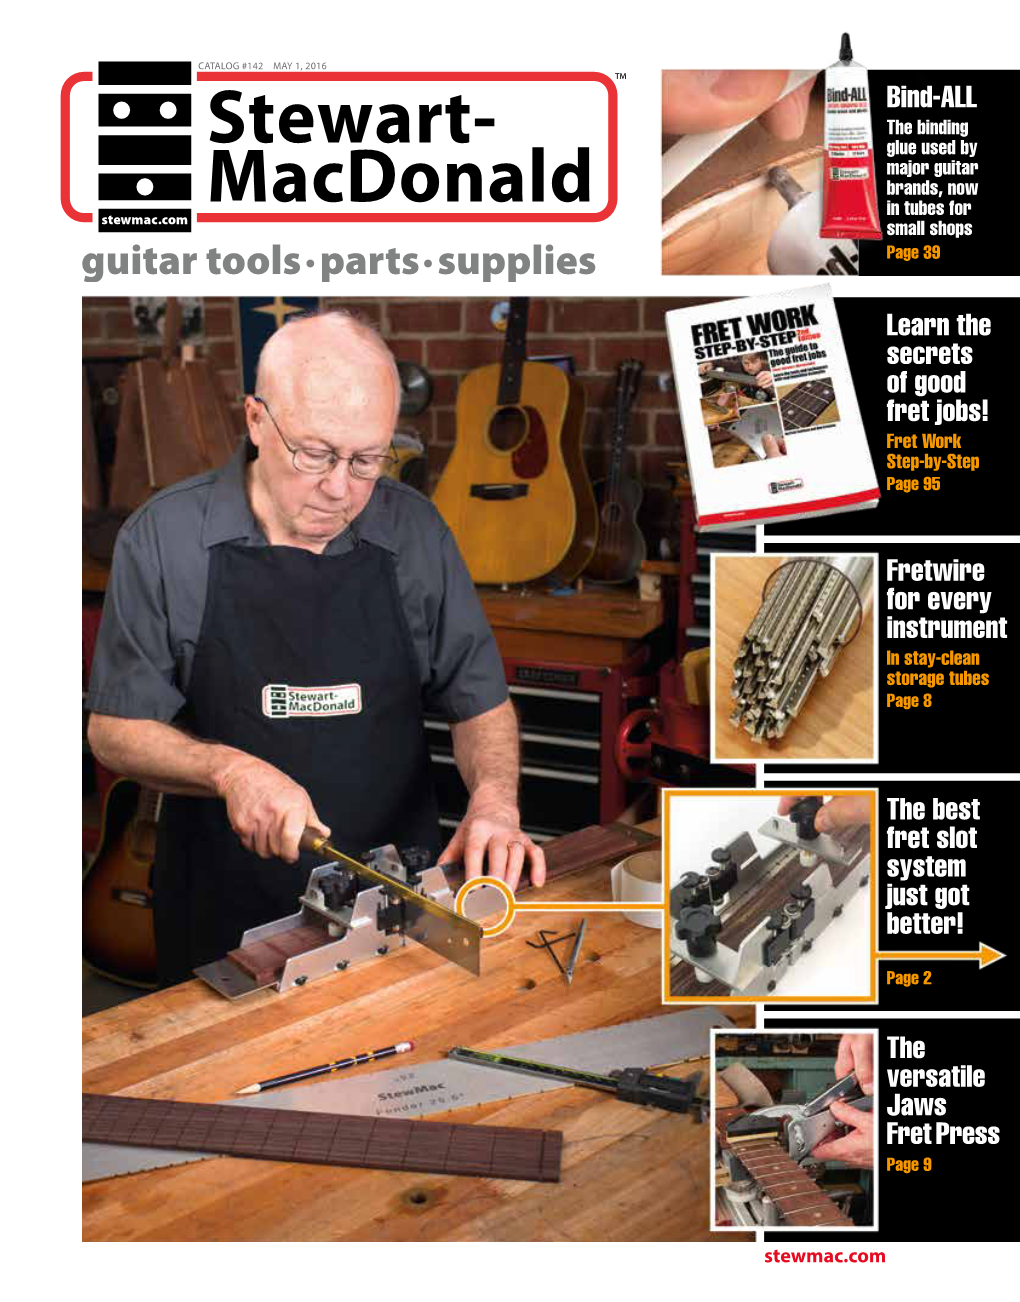 Learn the Secrets of Good Fret Jobs! Fret Work Step-By-Step Page 95